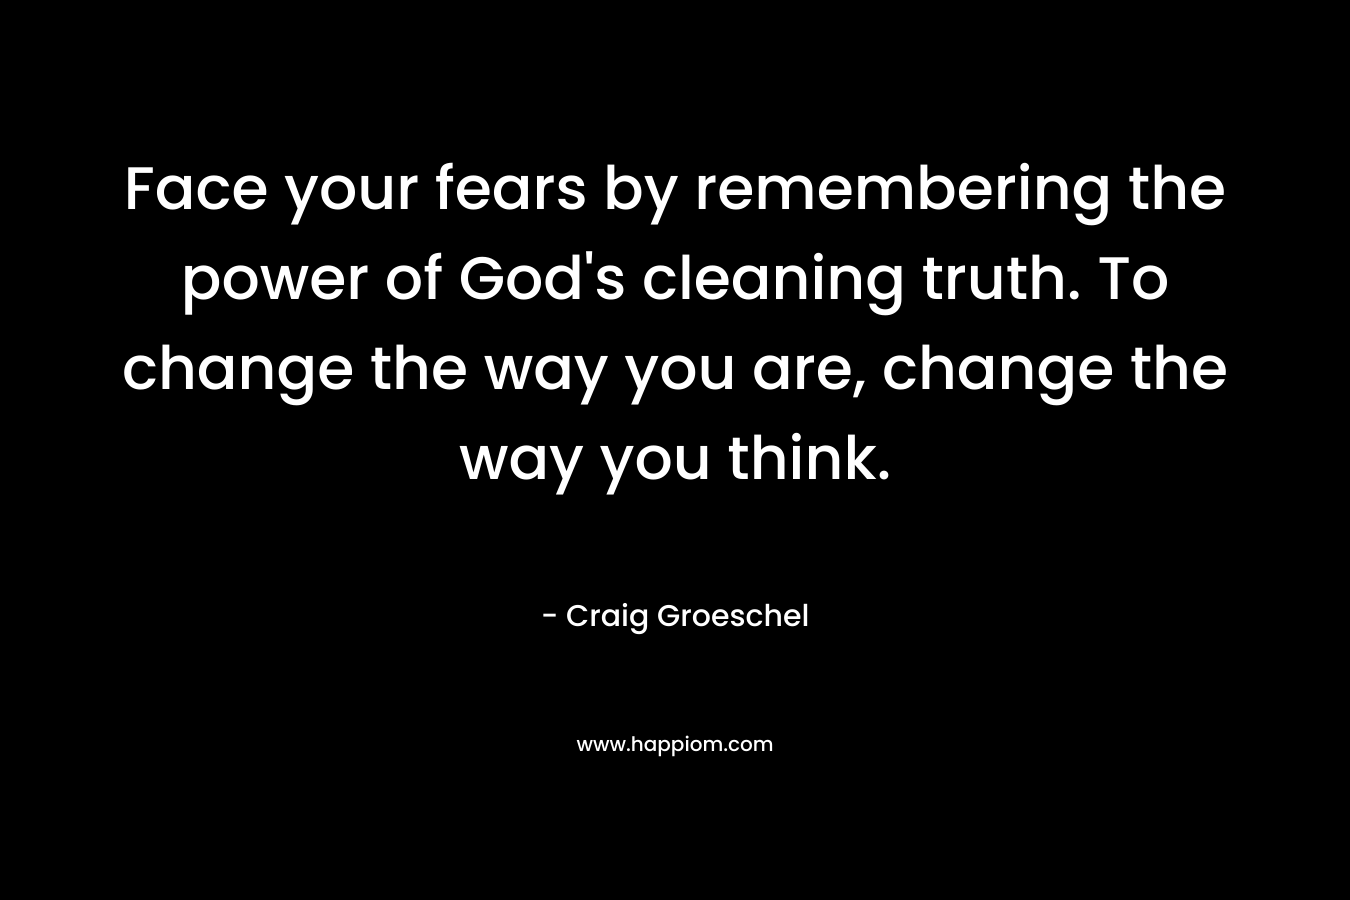 Face your fears by remembering the power of God’s cleaning truth. To change the way you are, change the way you think. – Craig Groeschel